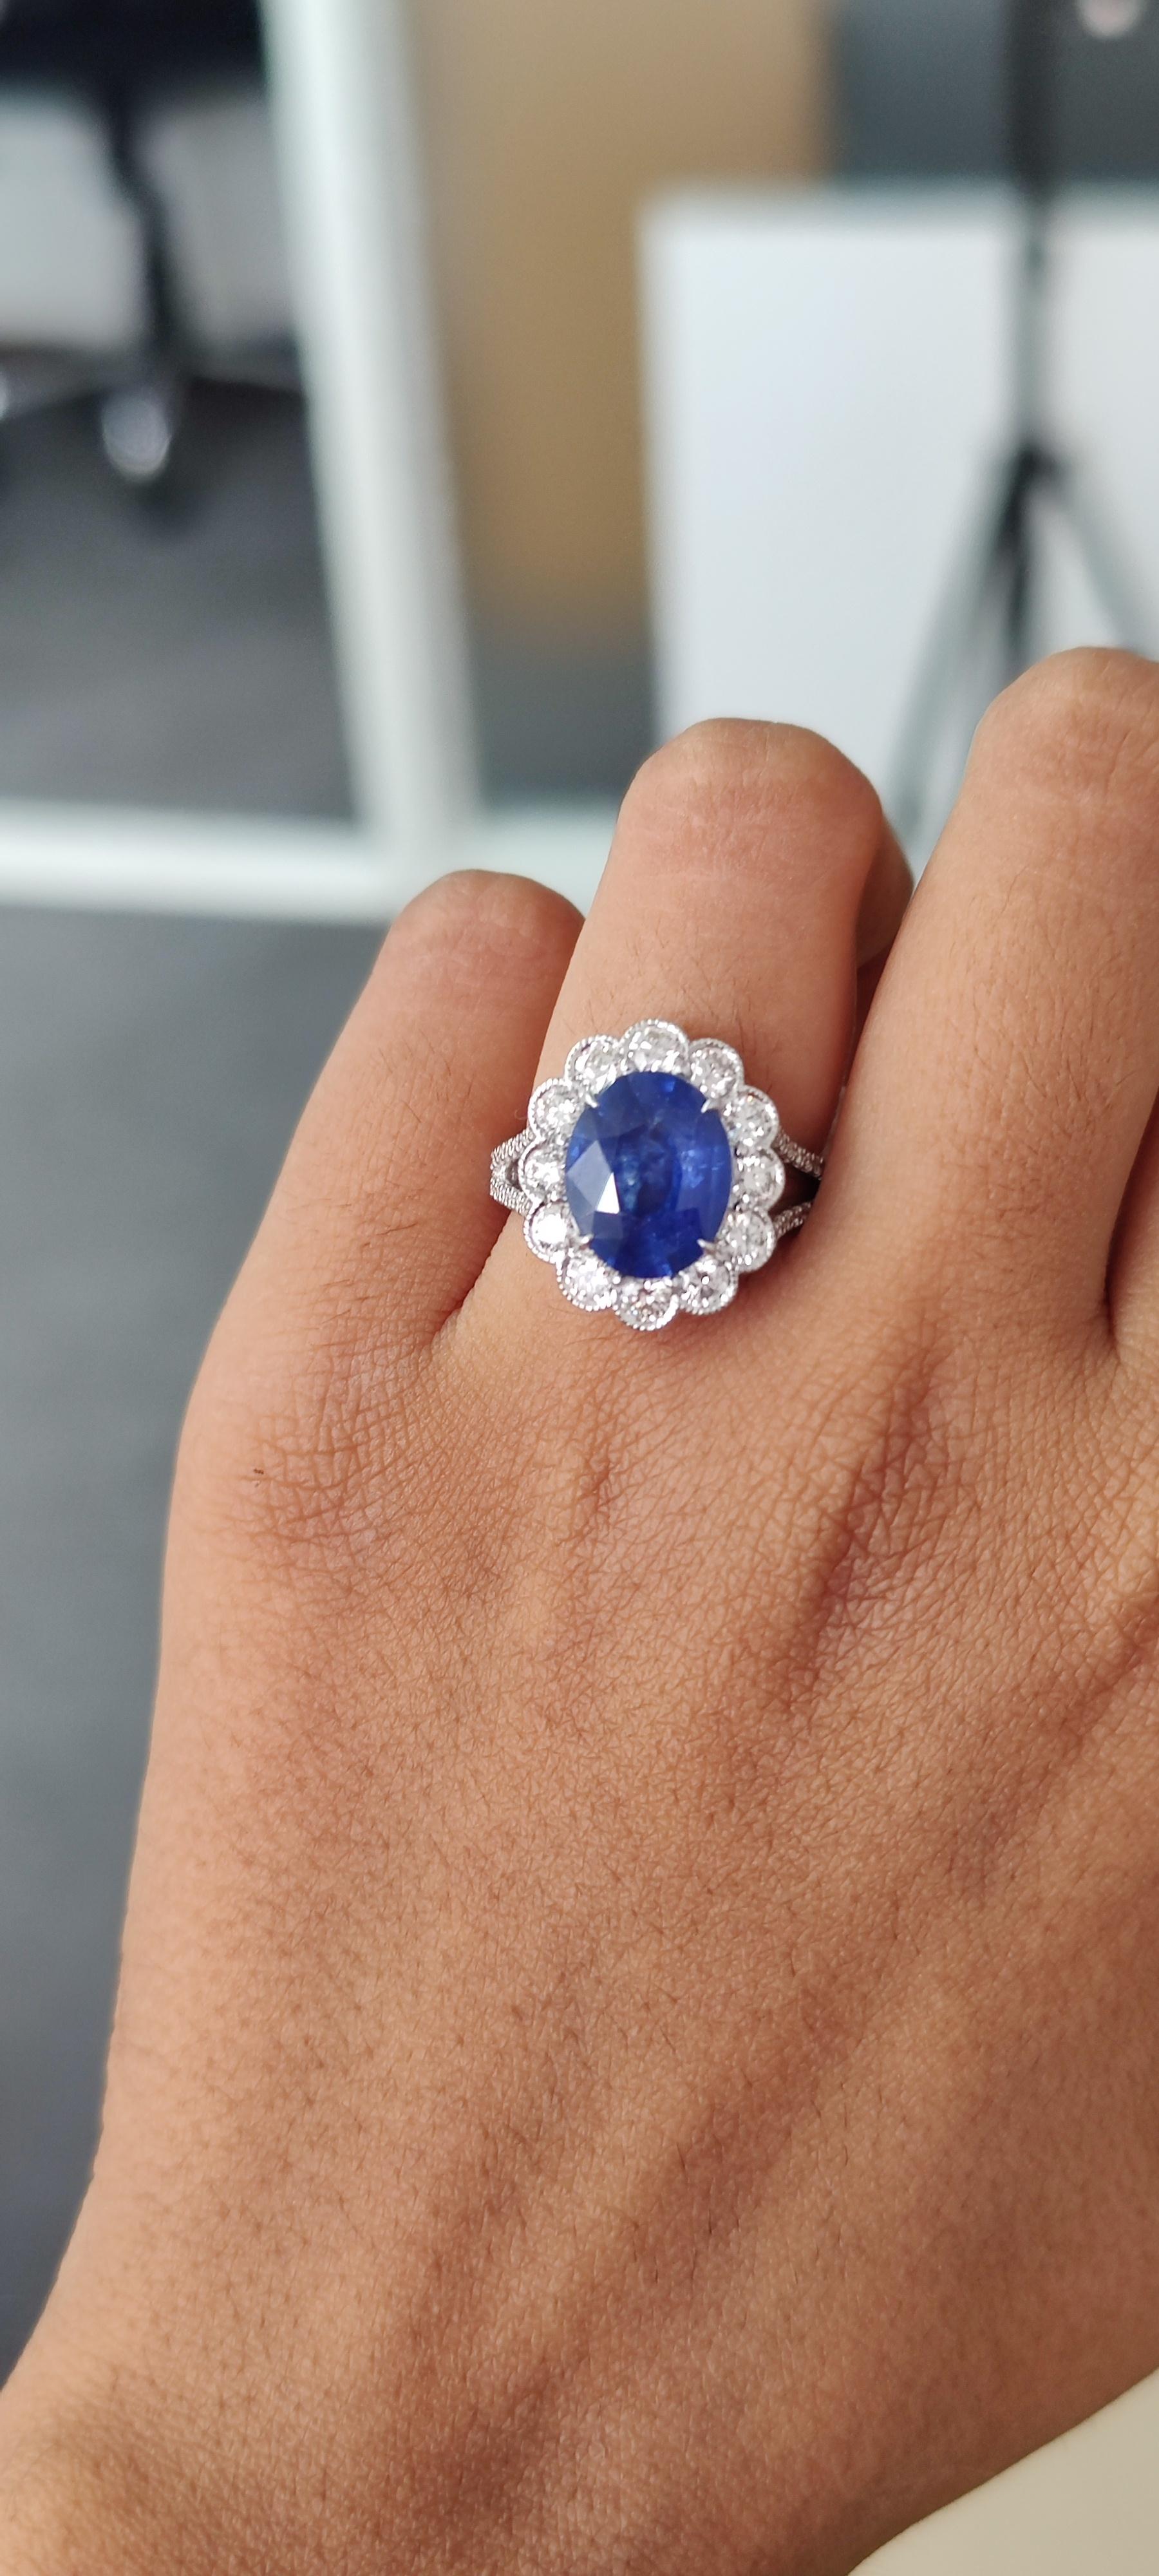 Victorian 4.32 Carat Ceylon Royal Blue Sapphire Ring in 18K White Gold For Sale